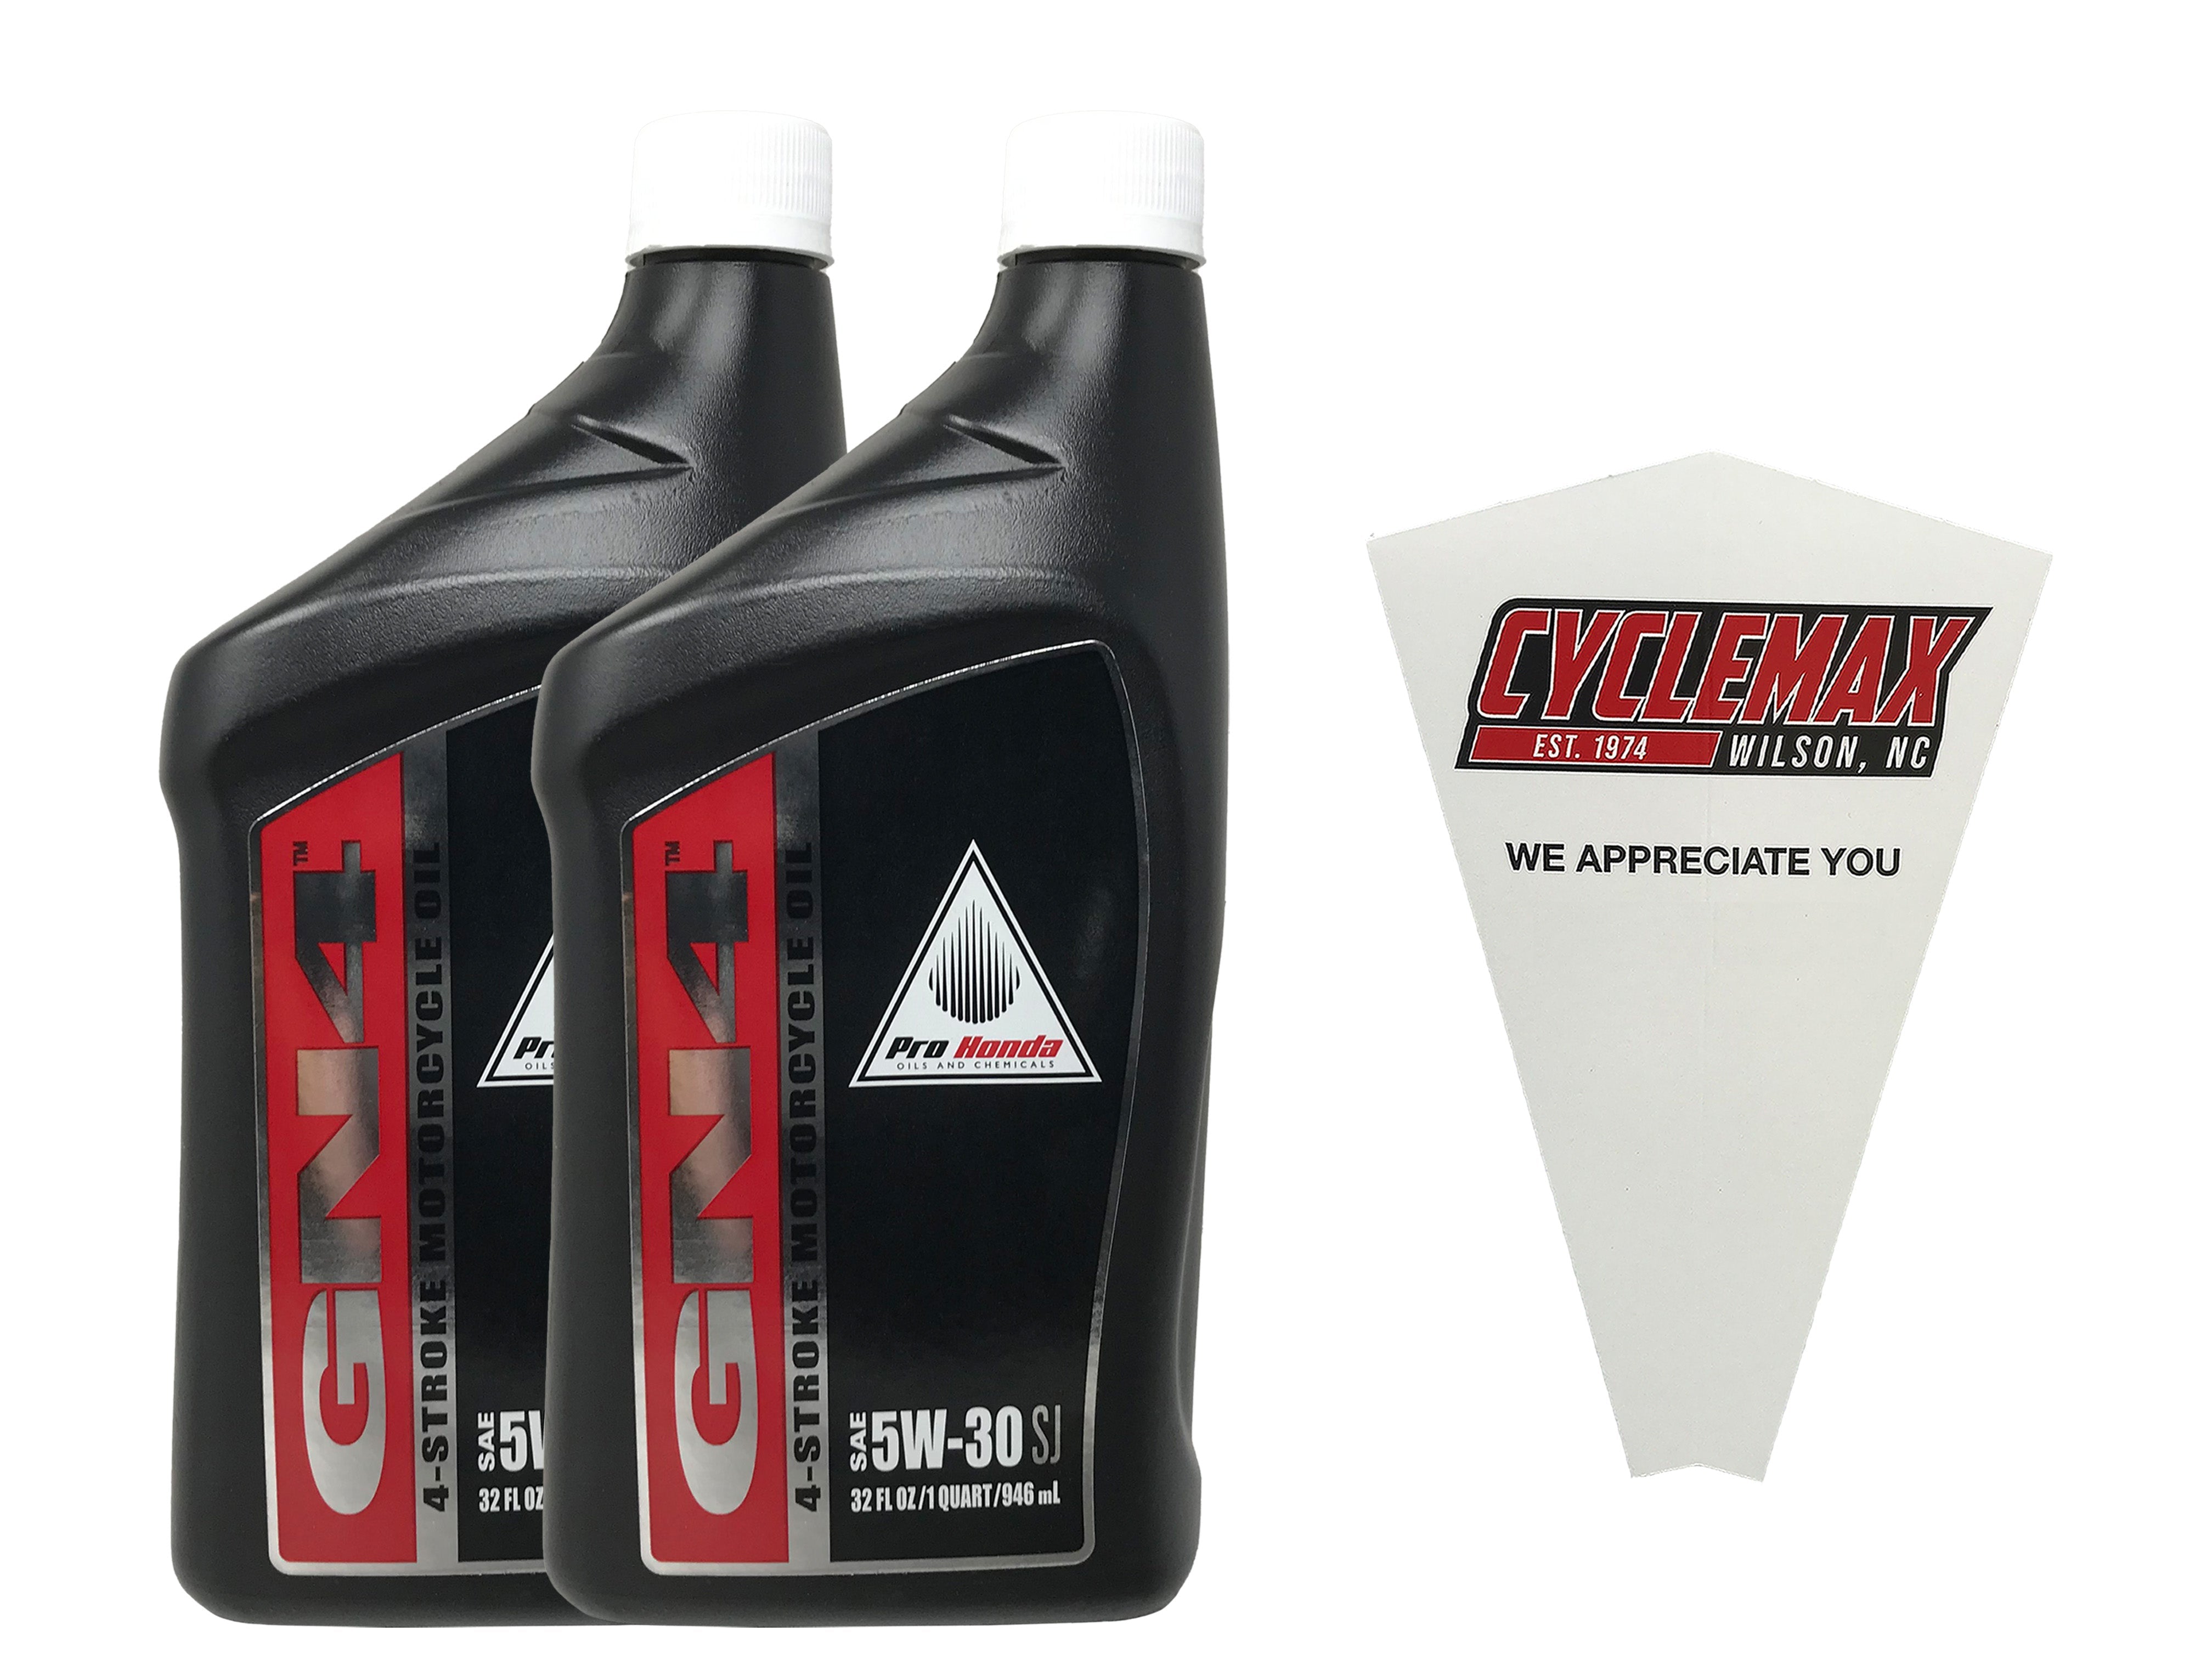 Cyclemax Two Pack for Honda GN4 5W-30 Engine Oil 08C35-A5201M02 Contains Two Quarts and a Funnel